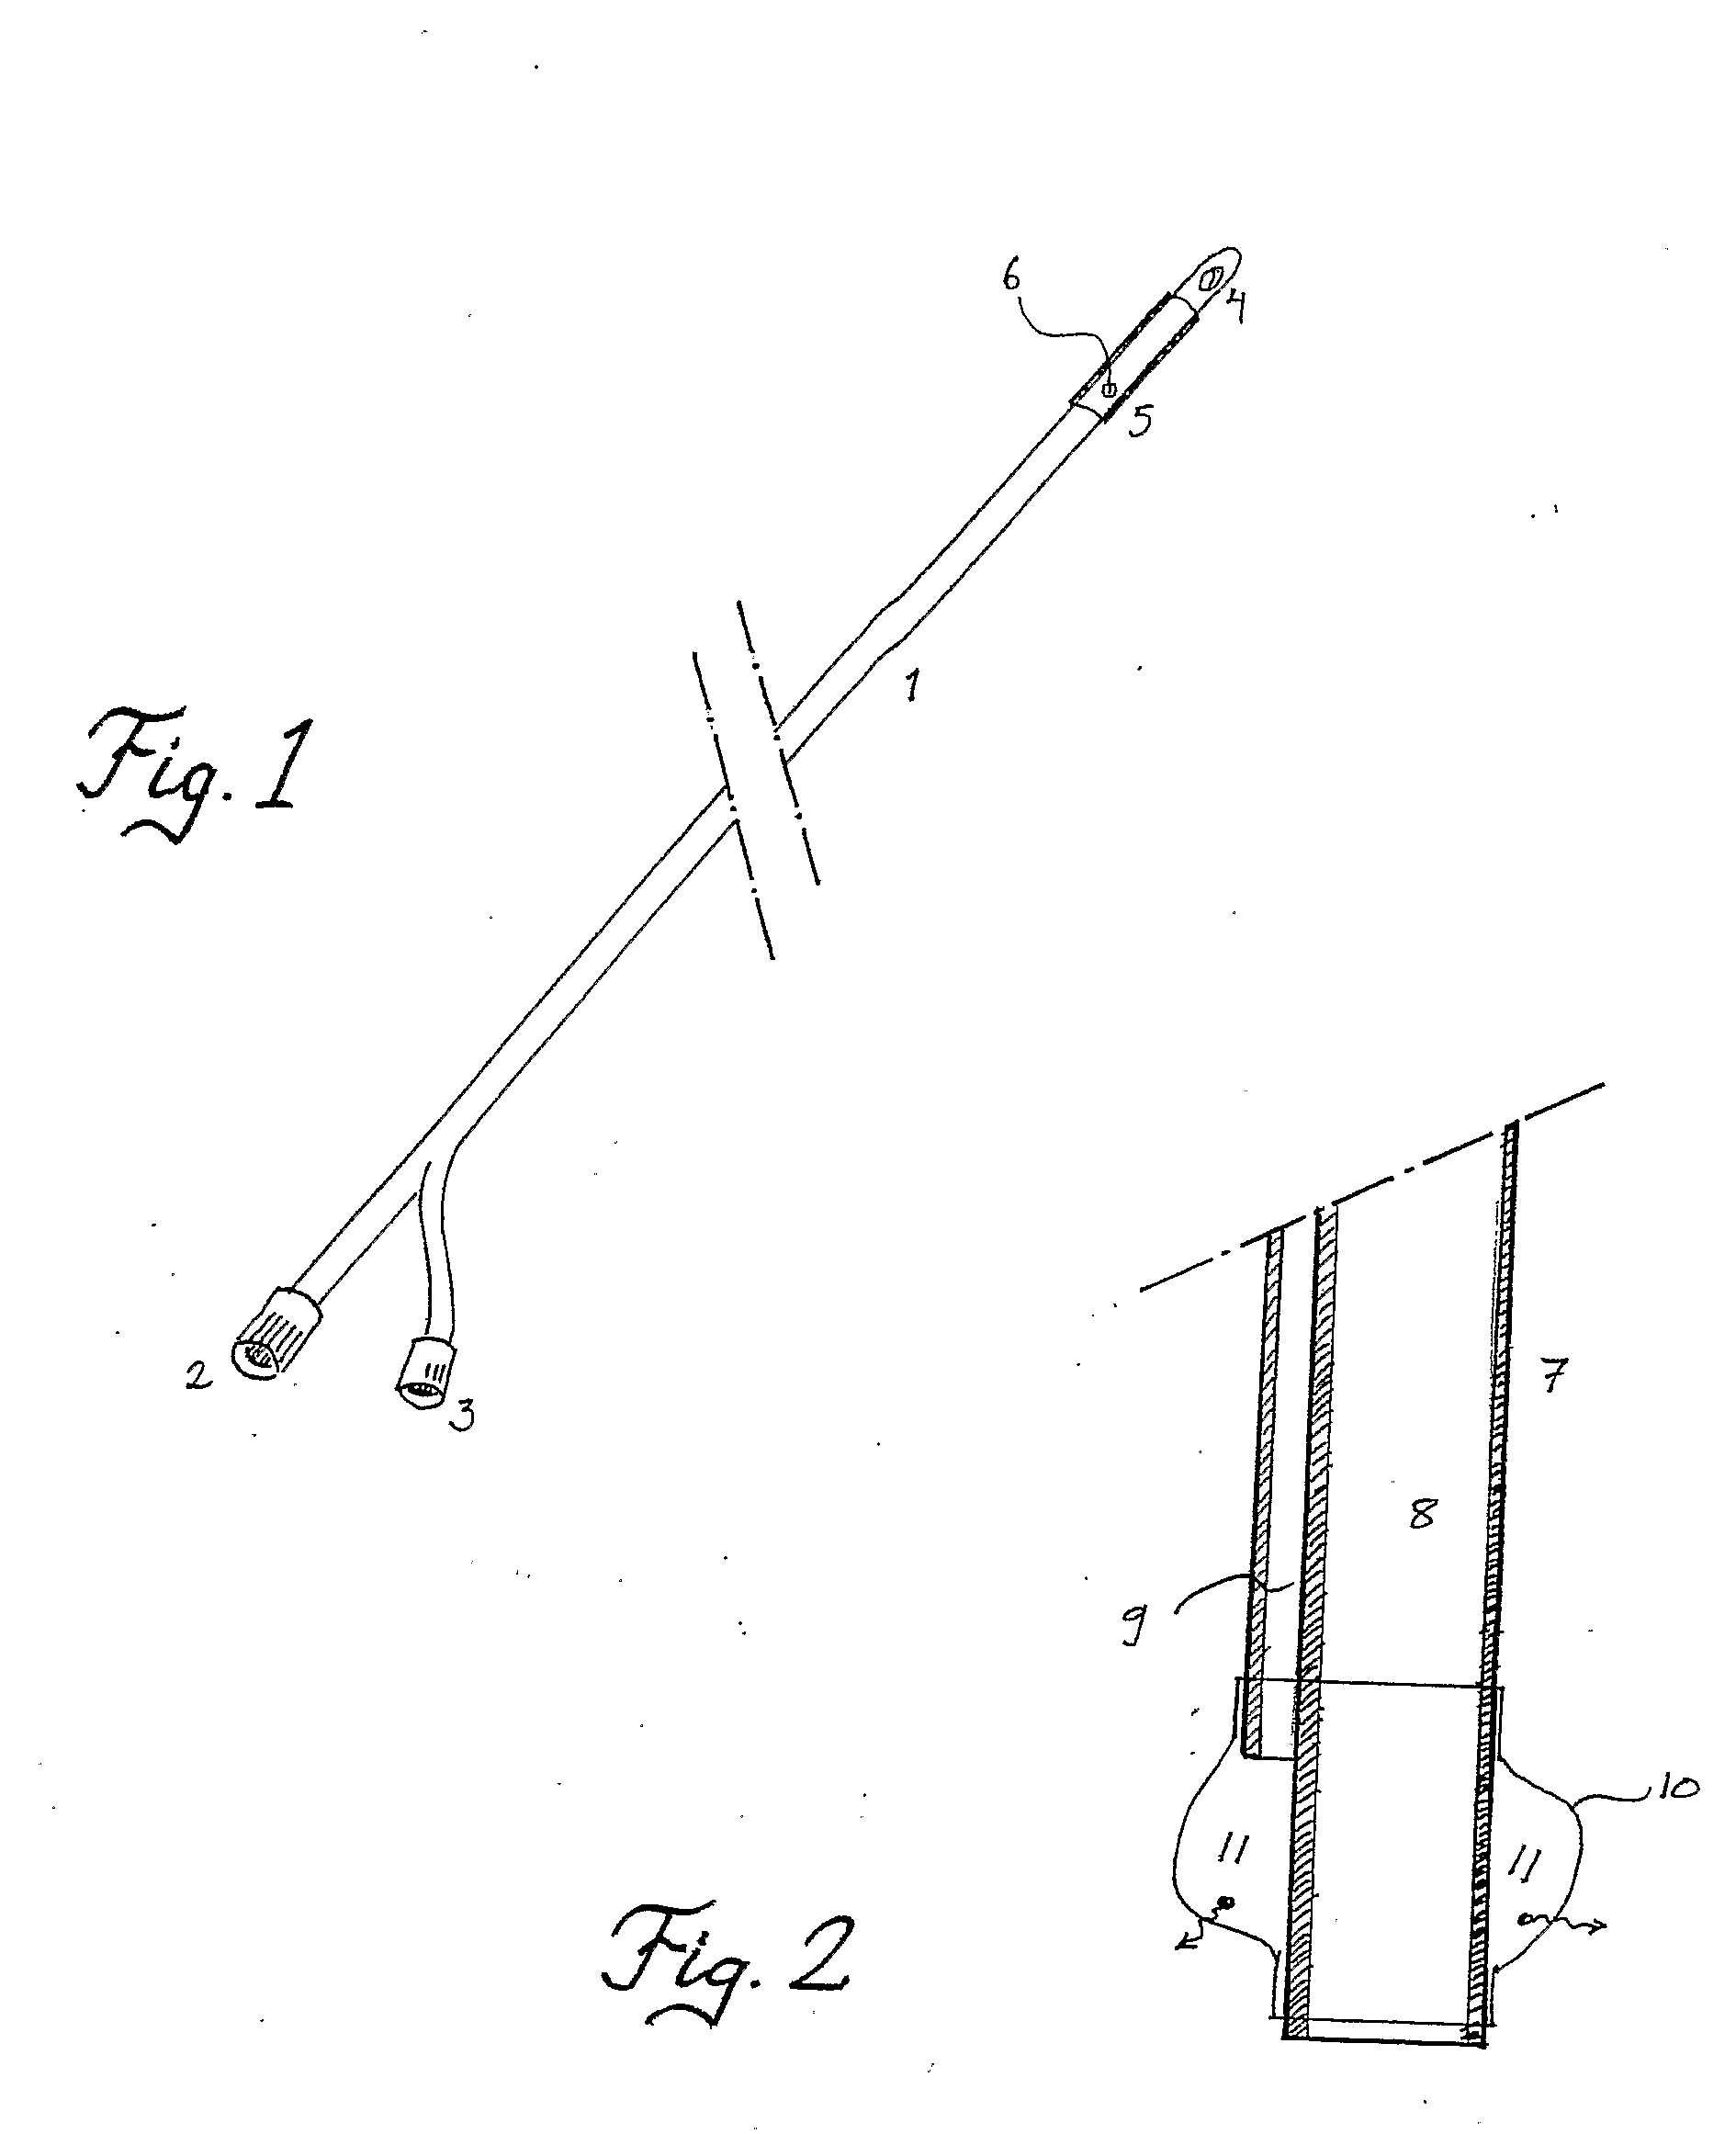 Device and Method for Administering Therapeutic Agents